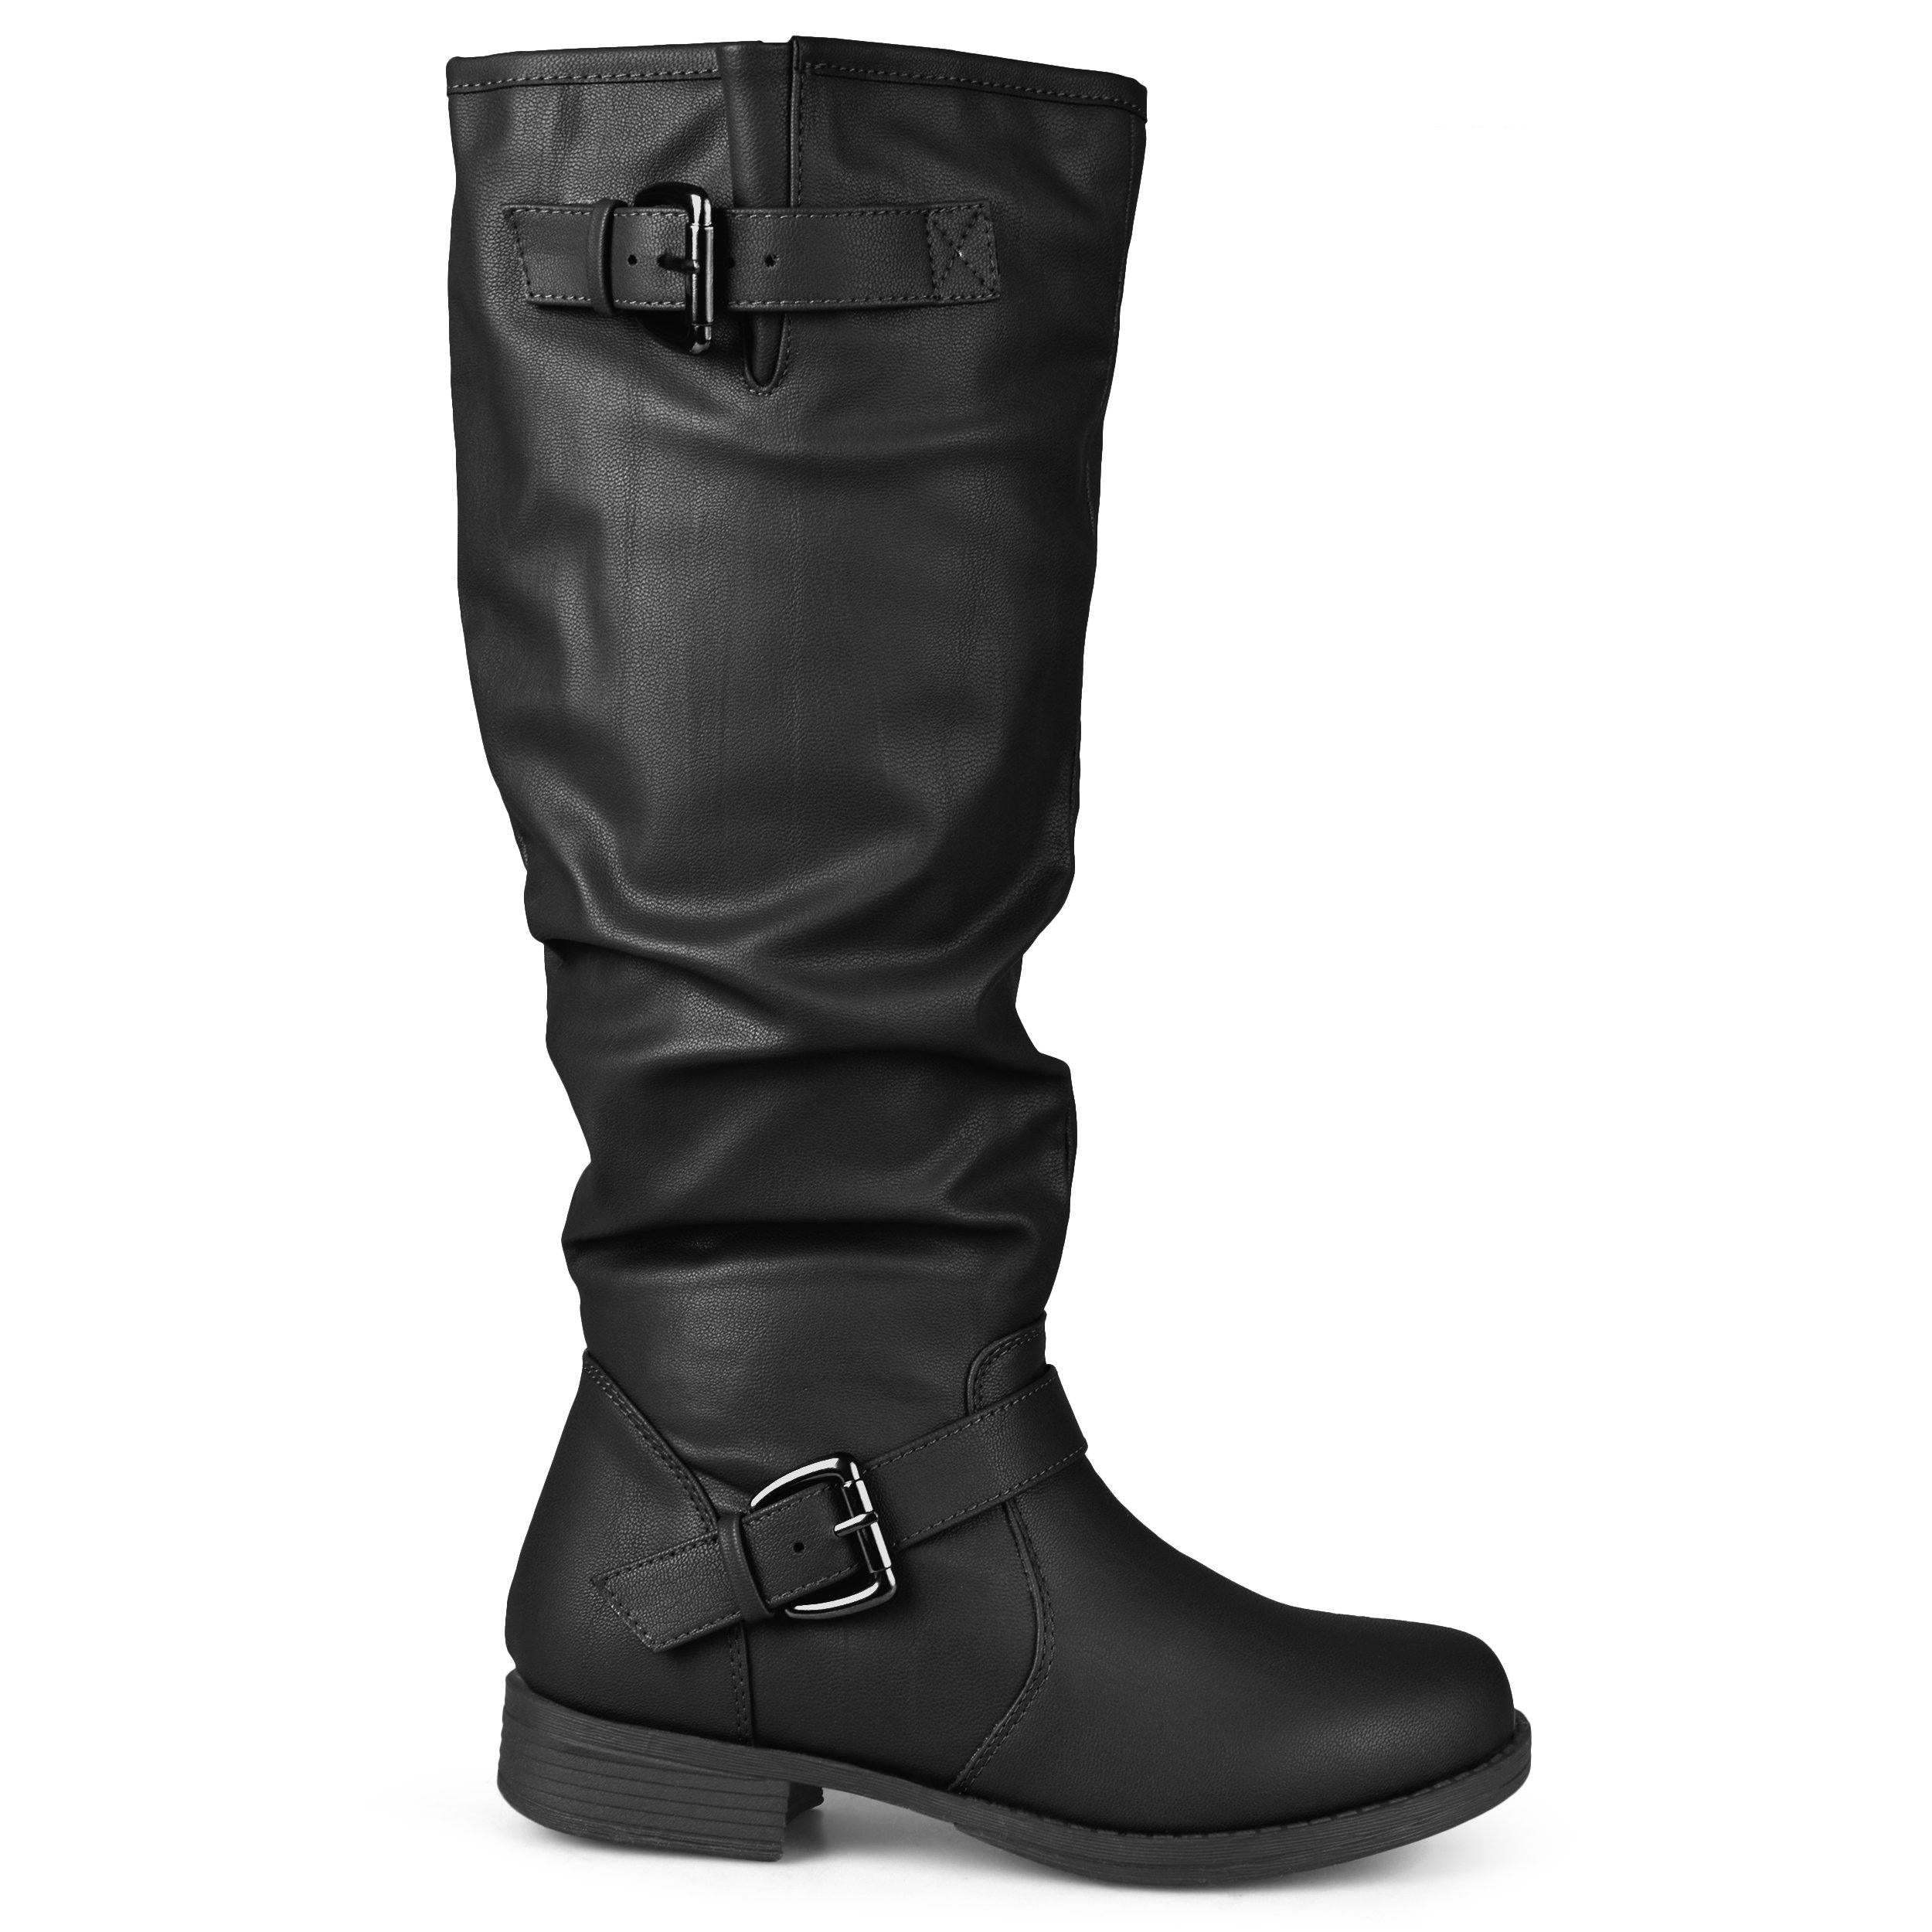 Stormy Extra Wide Calf Boot, Women's Slouchy Boots